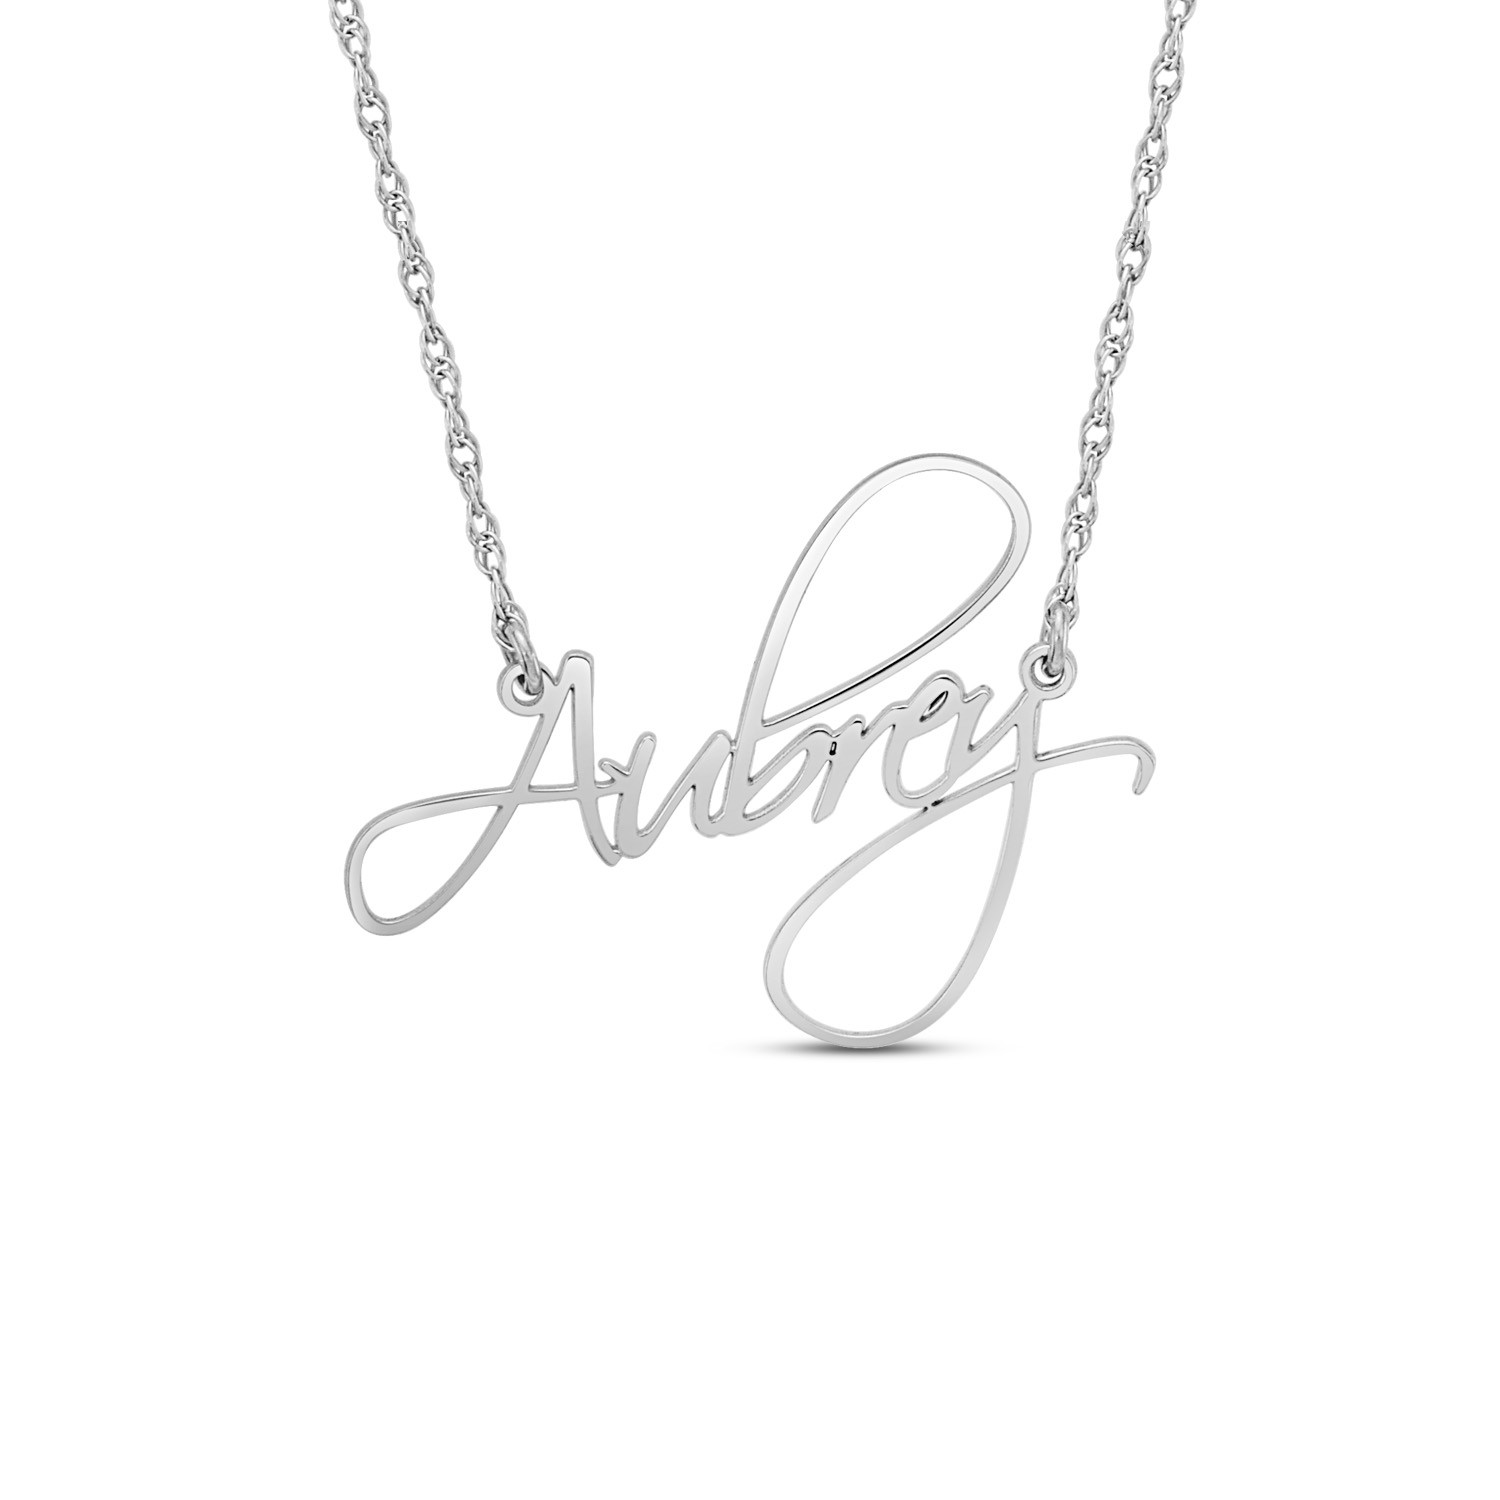 Personalized Script Name Necklace